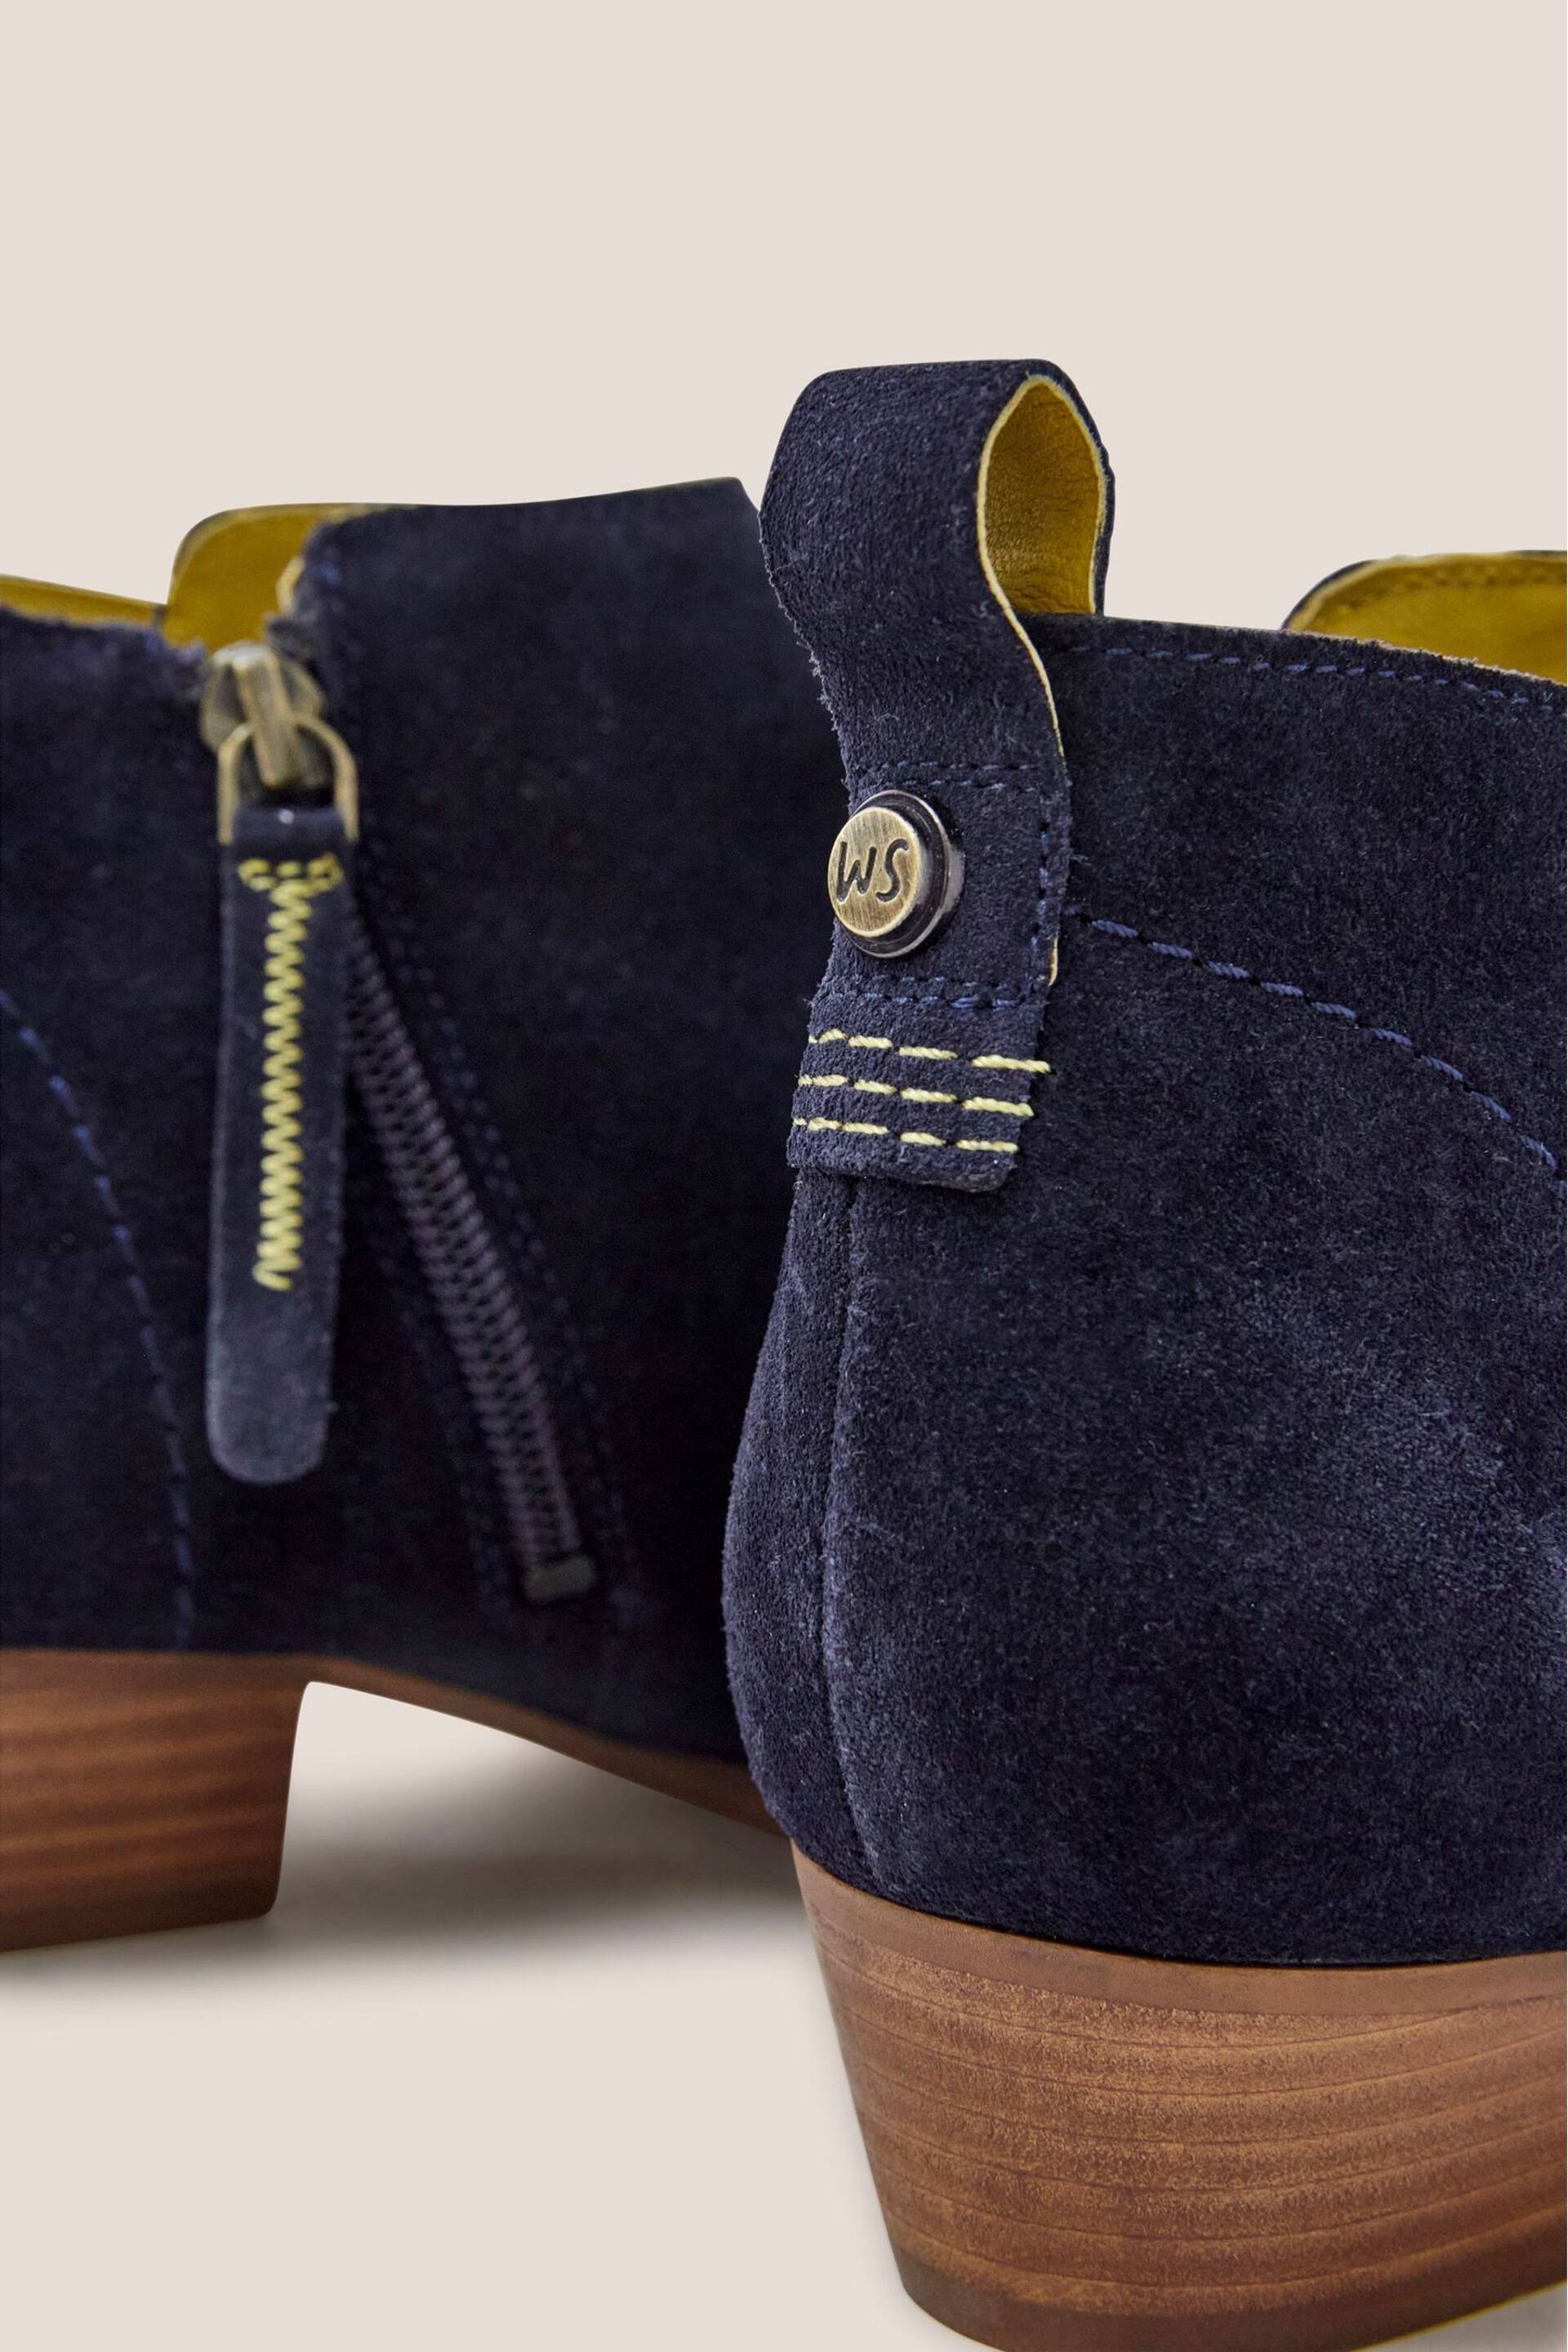 White Stuff Blue Wide Fit Suede Ankle Boots - Image 4 of 4